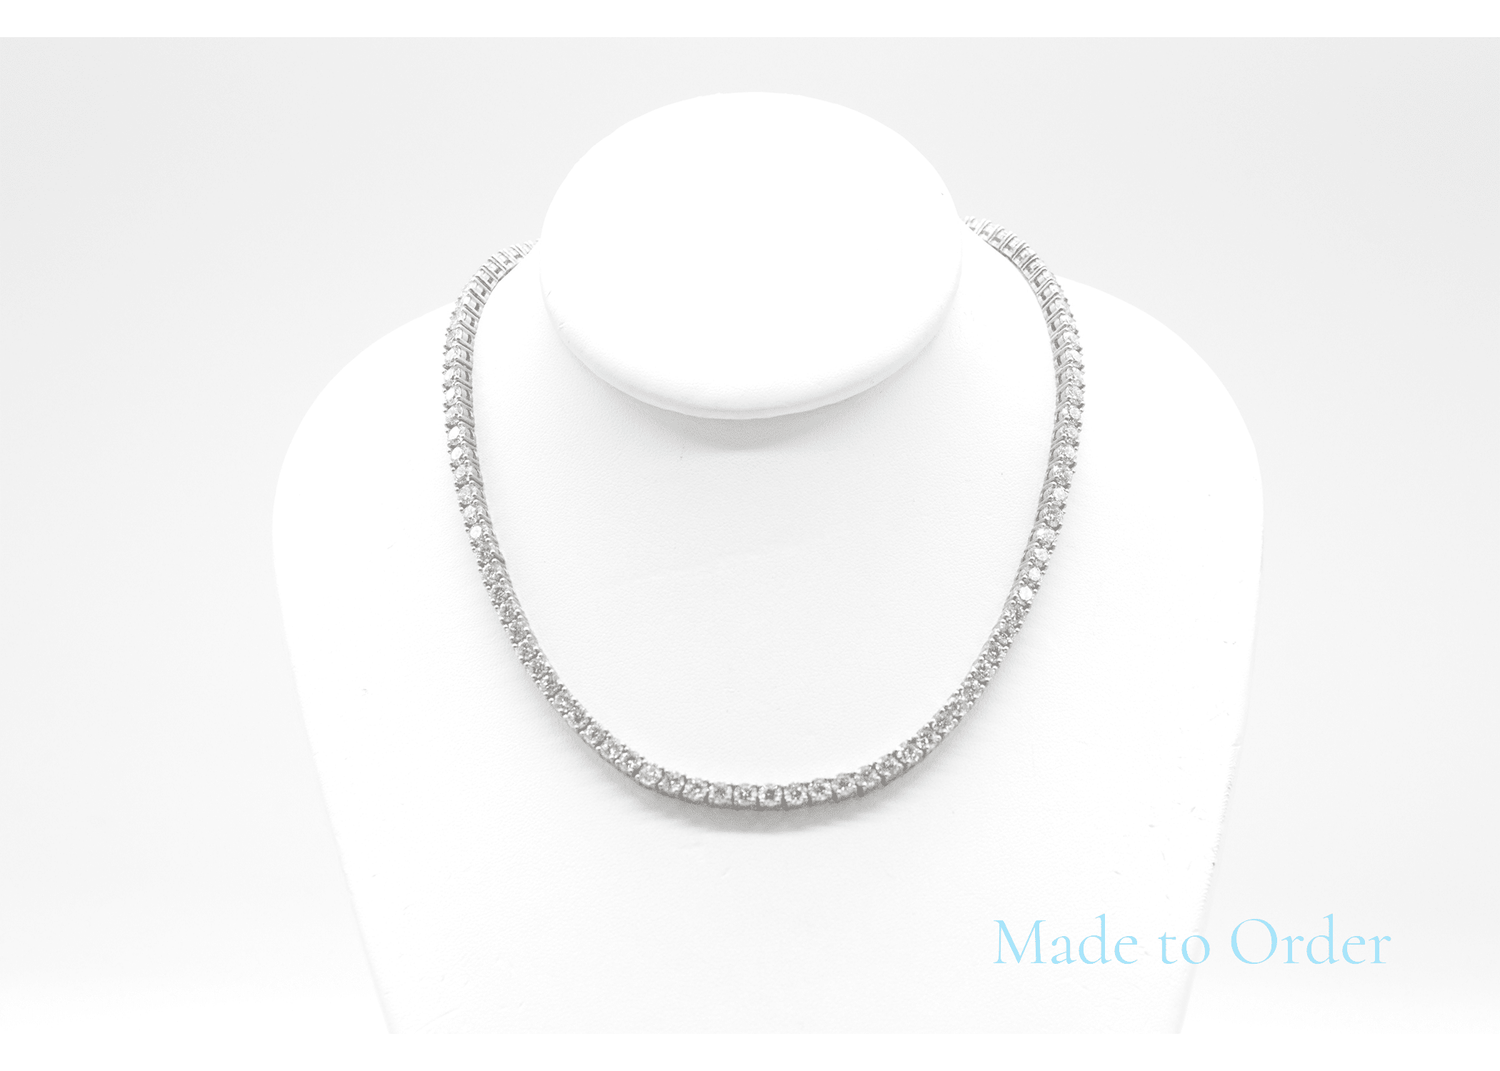 Made To Order Natural Diamond Chain Necklace